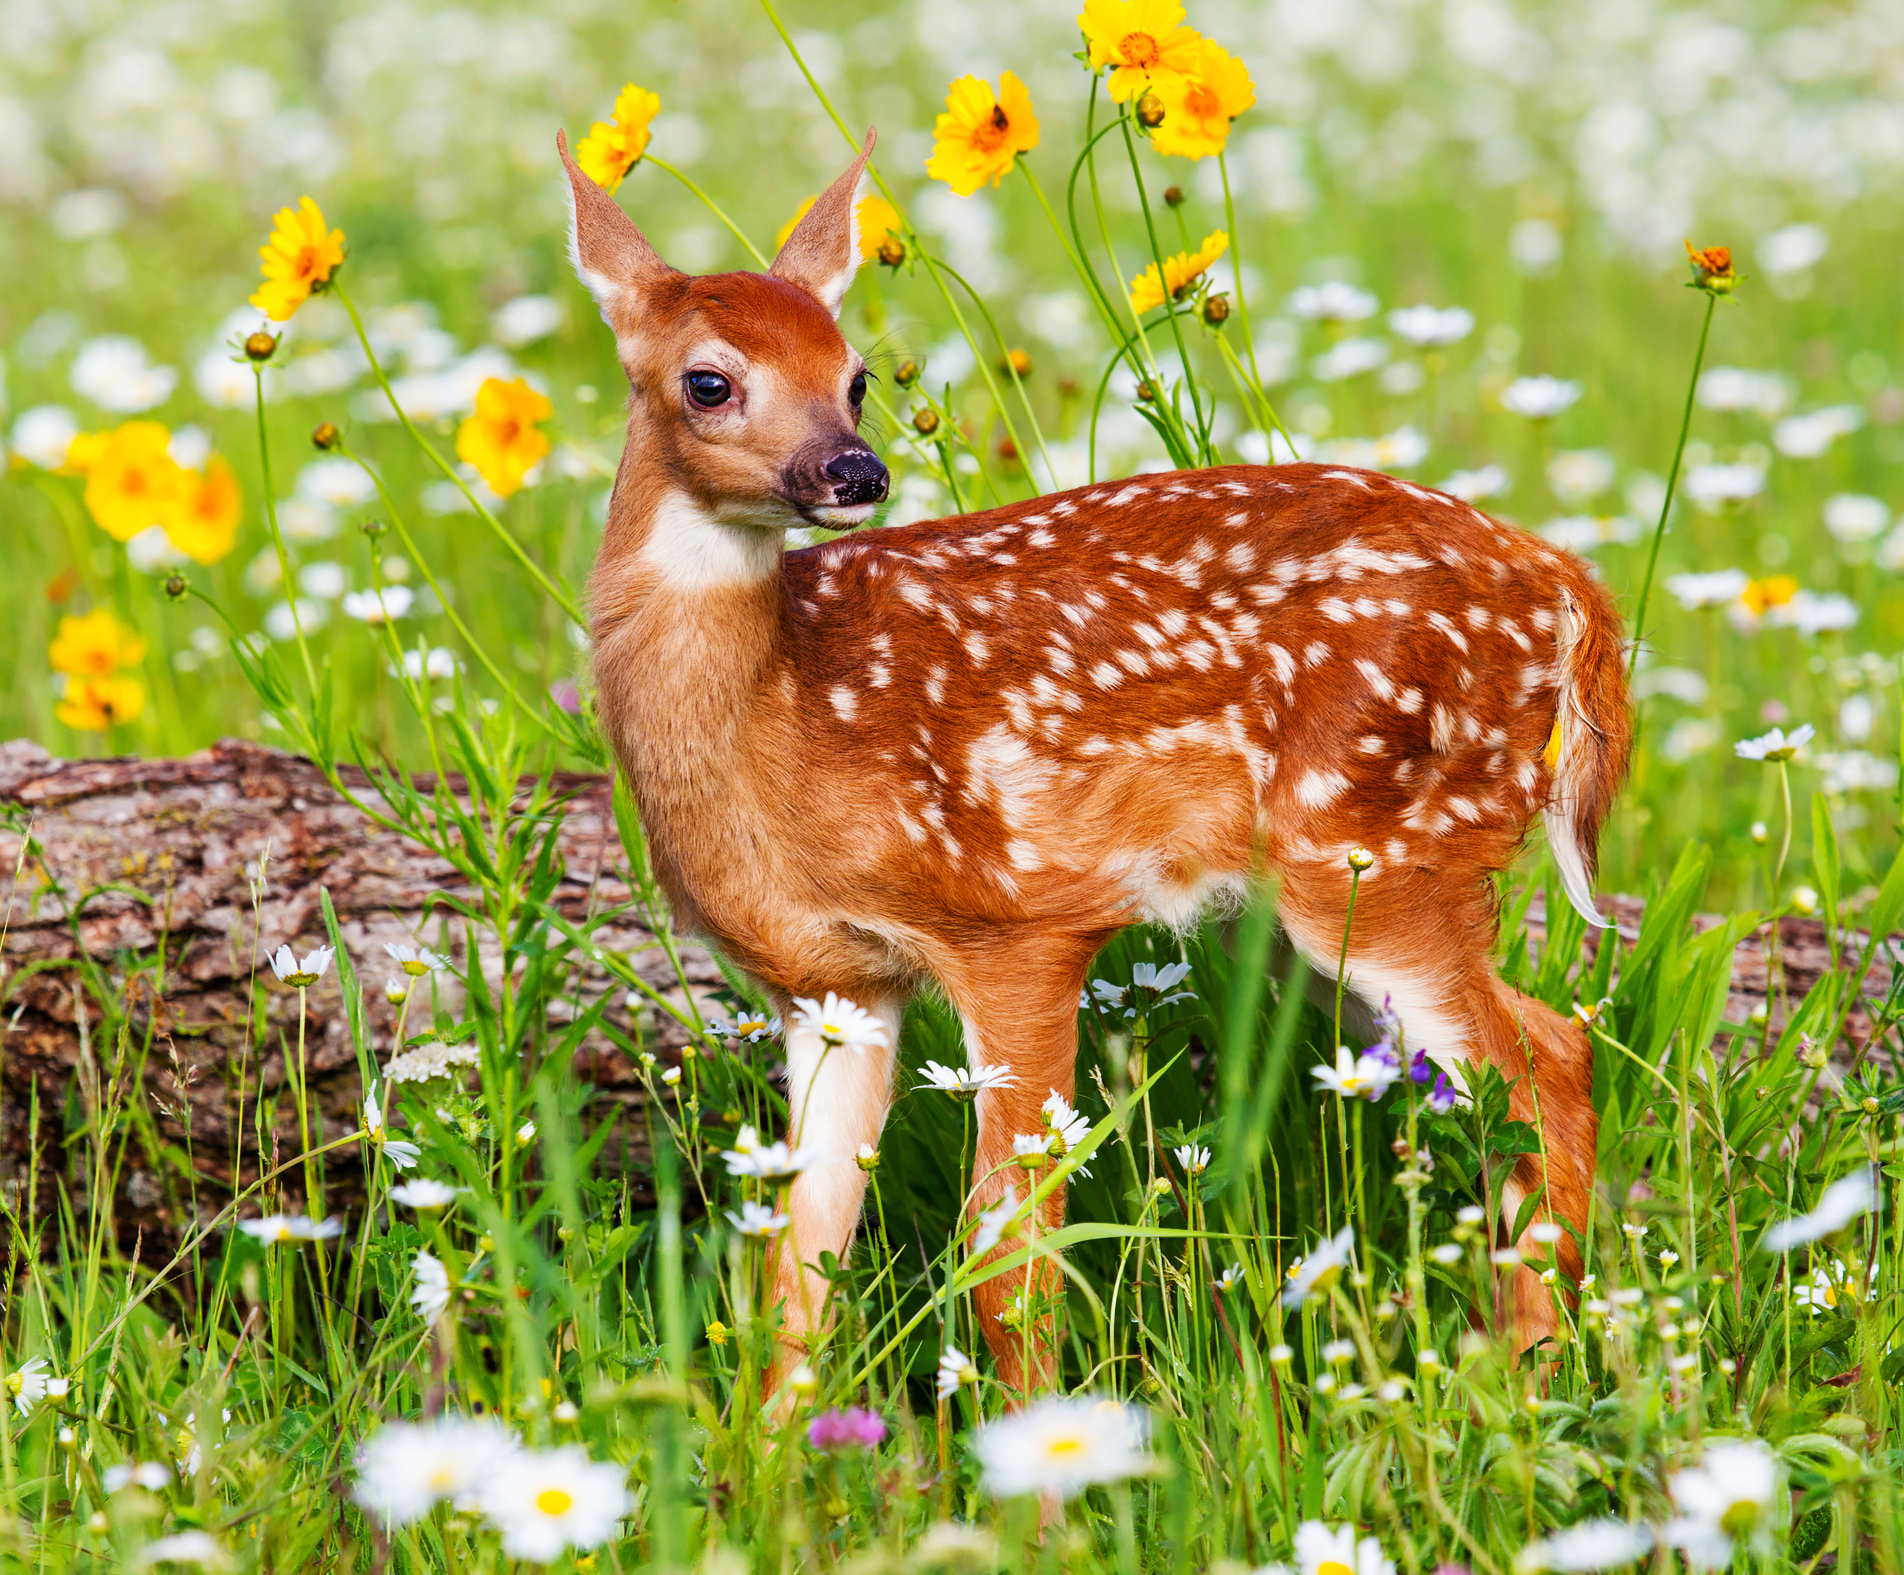 The 50 Cutest Native Animals in Every State